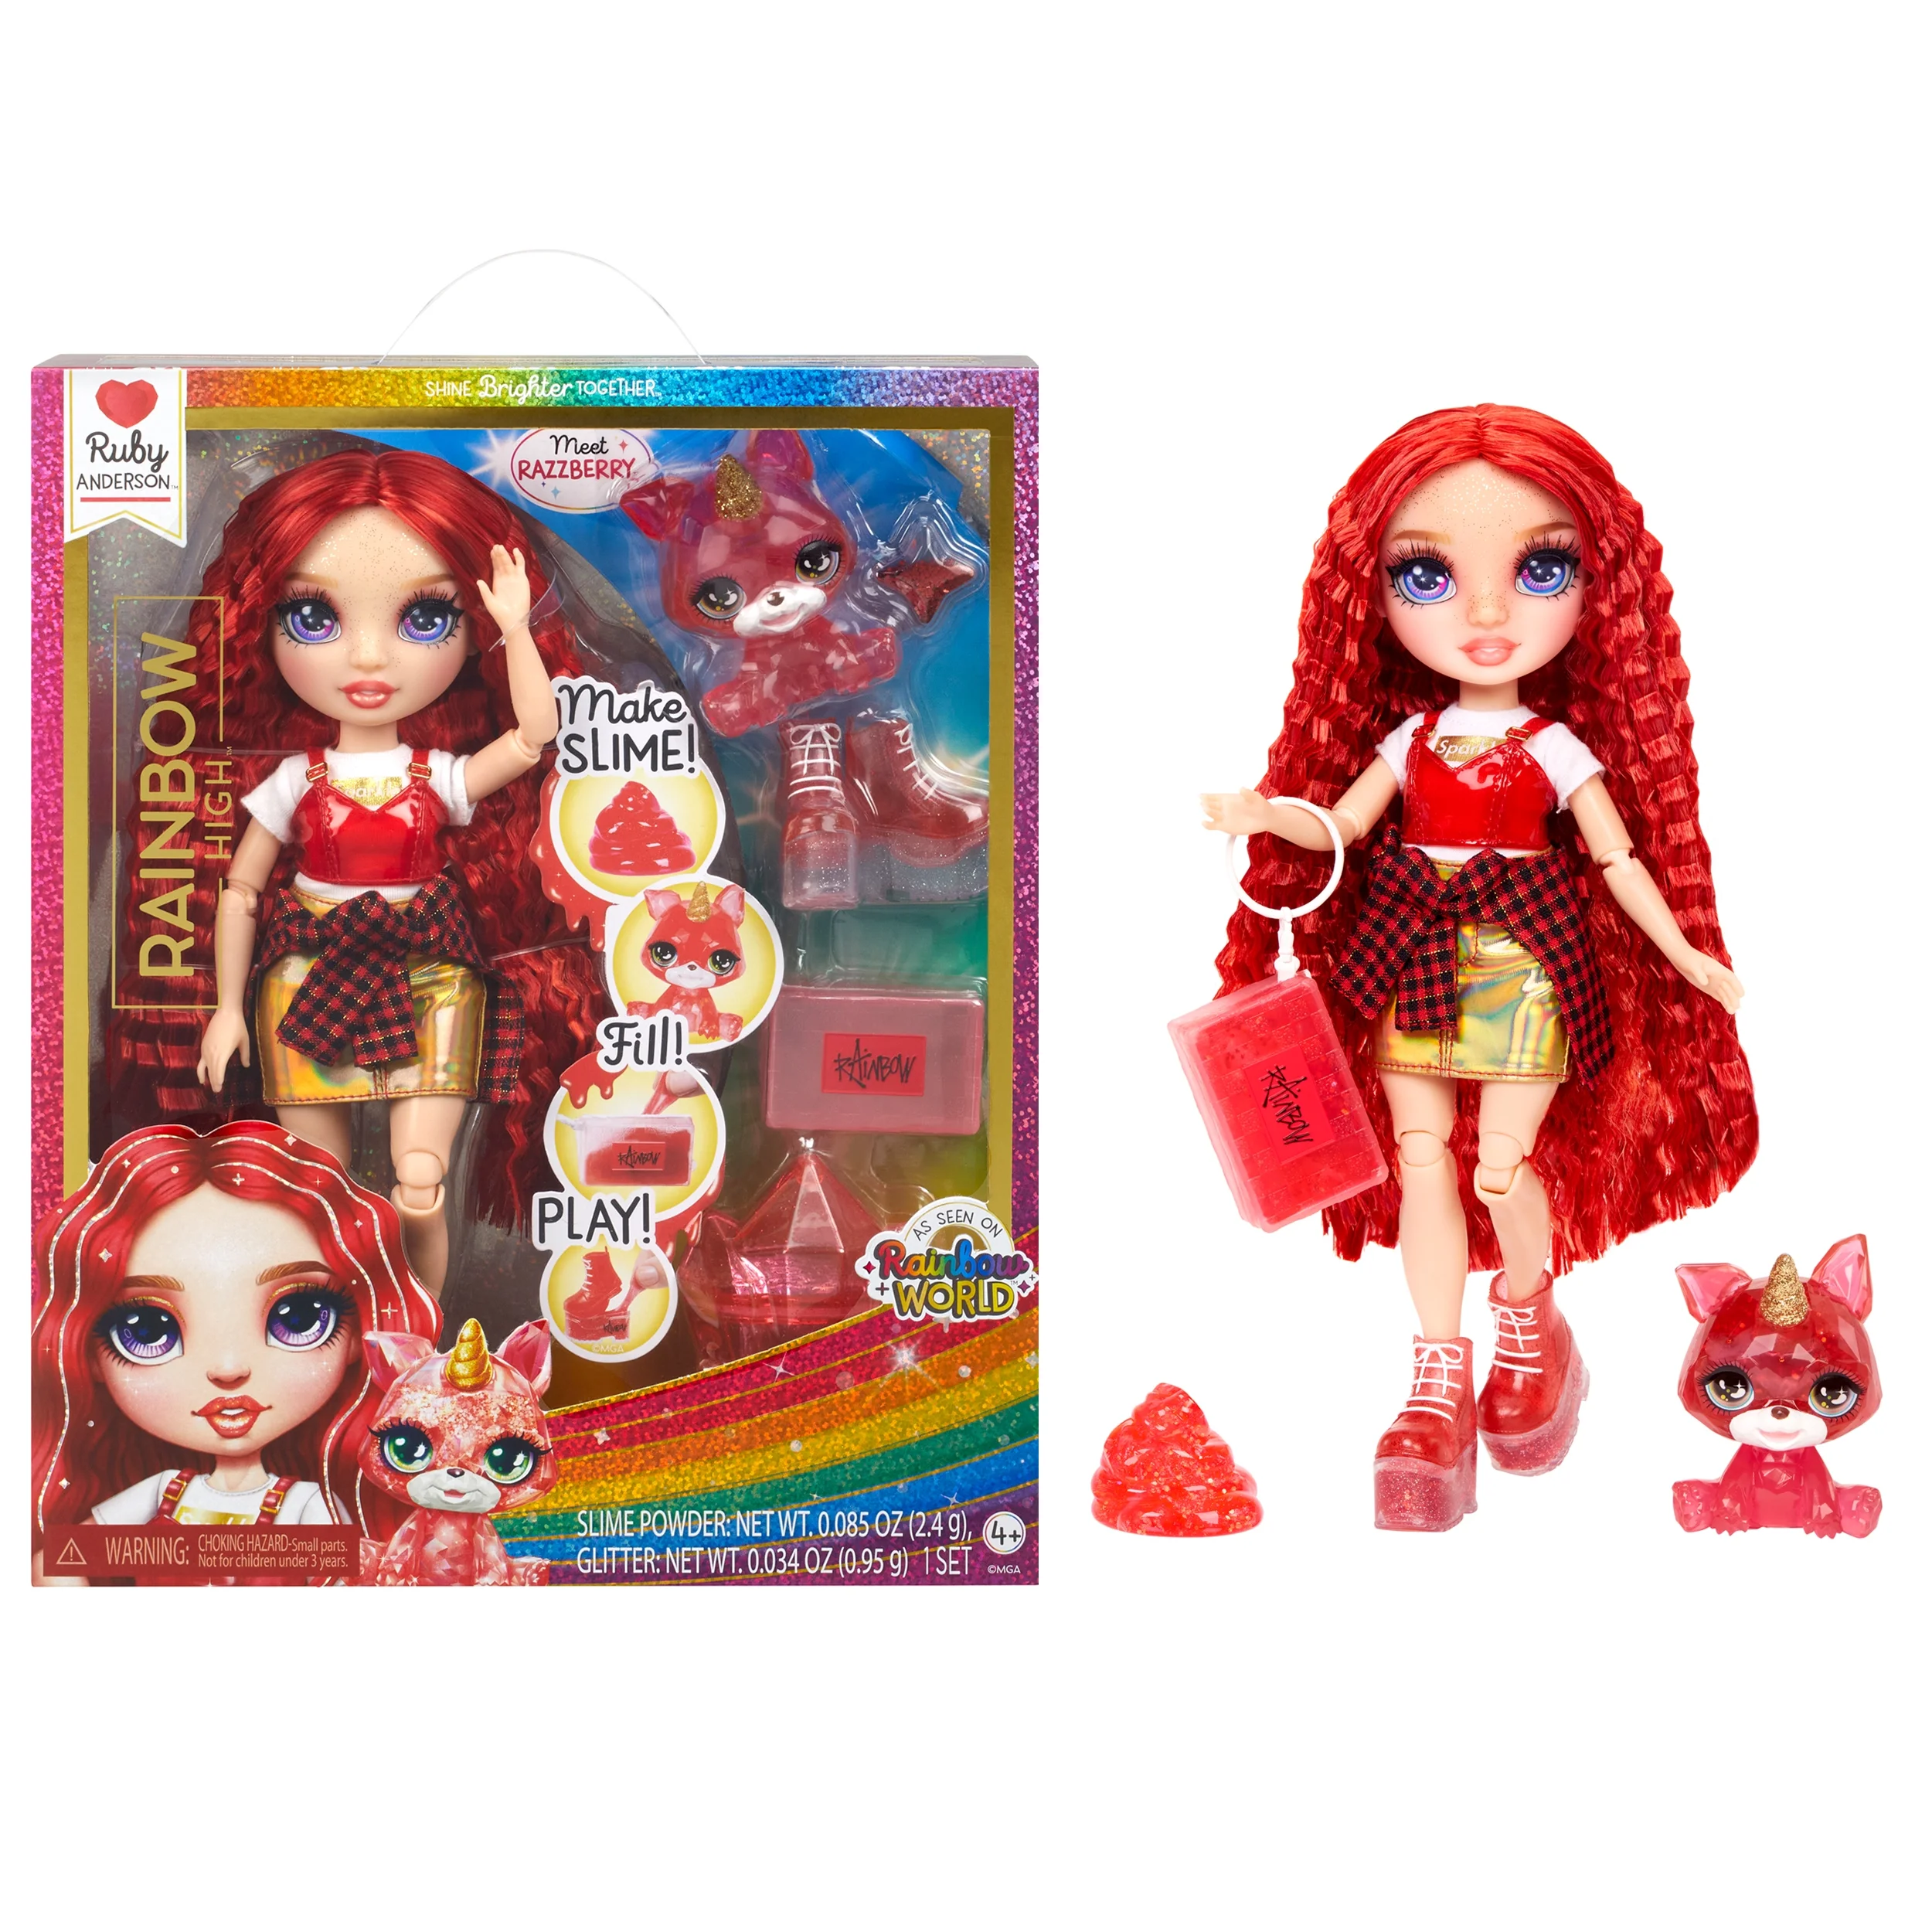 Rainbow High Ruby, Red with Yeti Pet, 11” Doll, DIY Sparkle Slime Kit, Fashion Accessories, Kids Gift 4-12